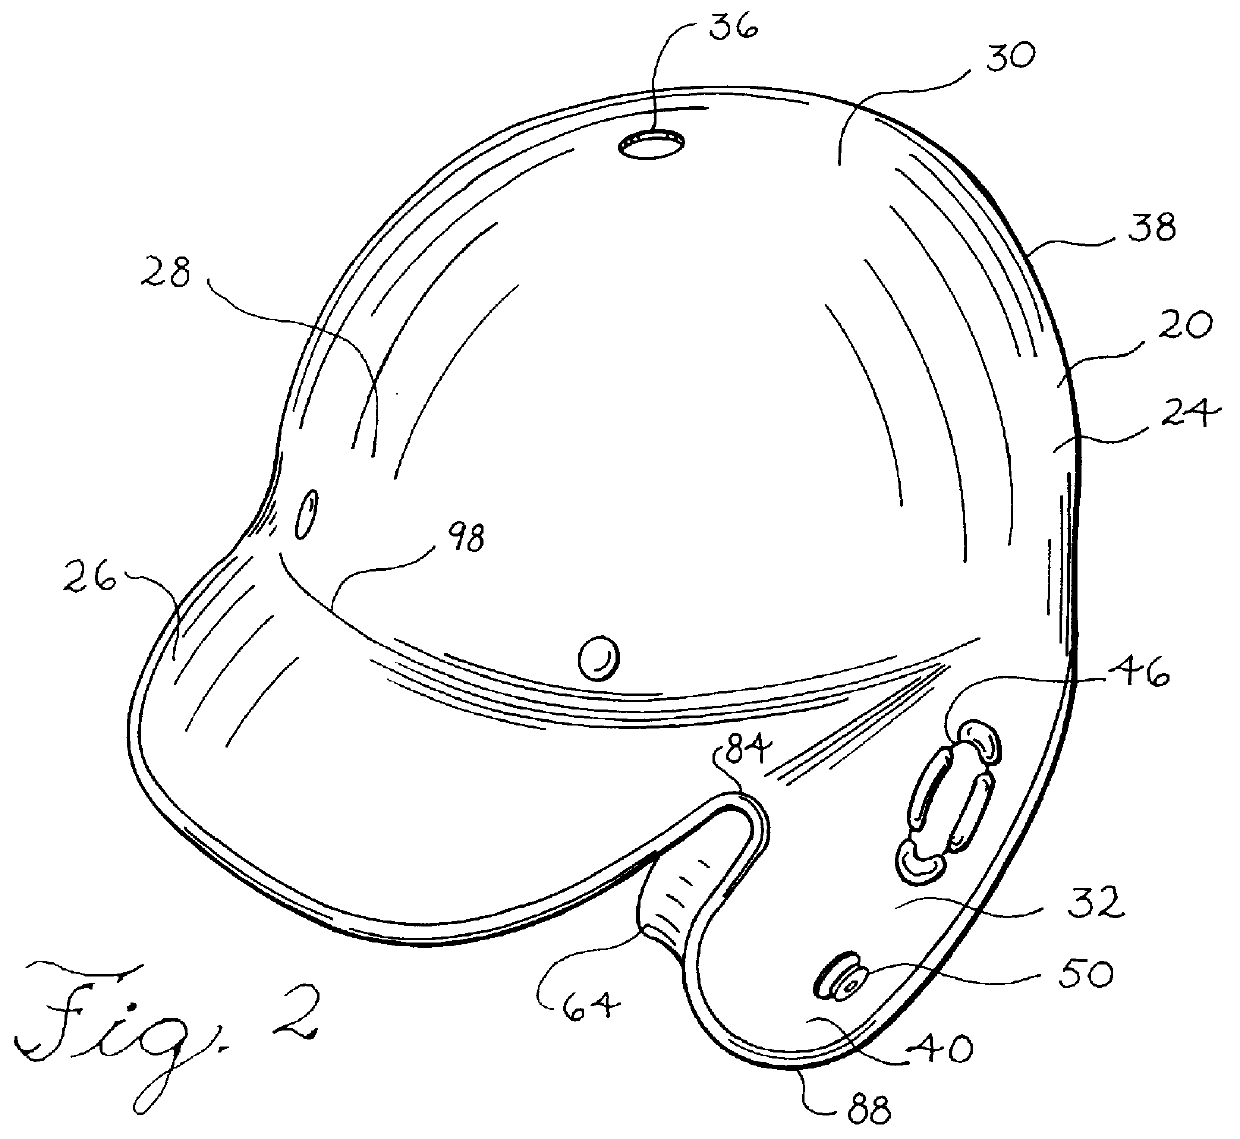 One-size-fits-all helmet